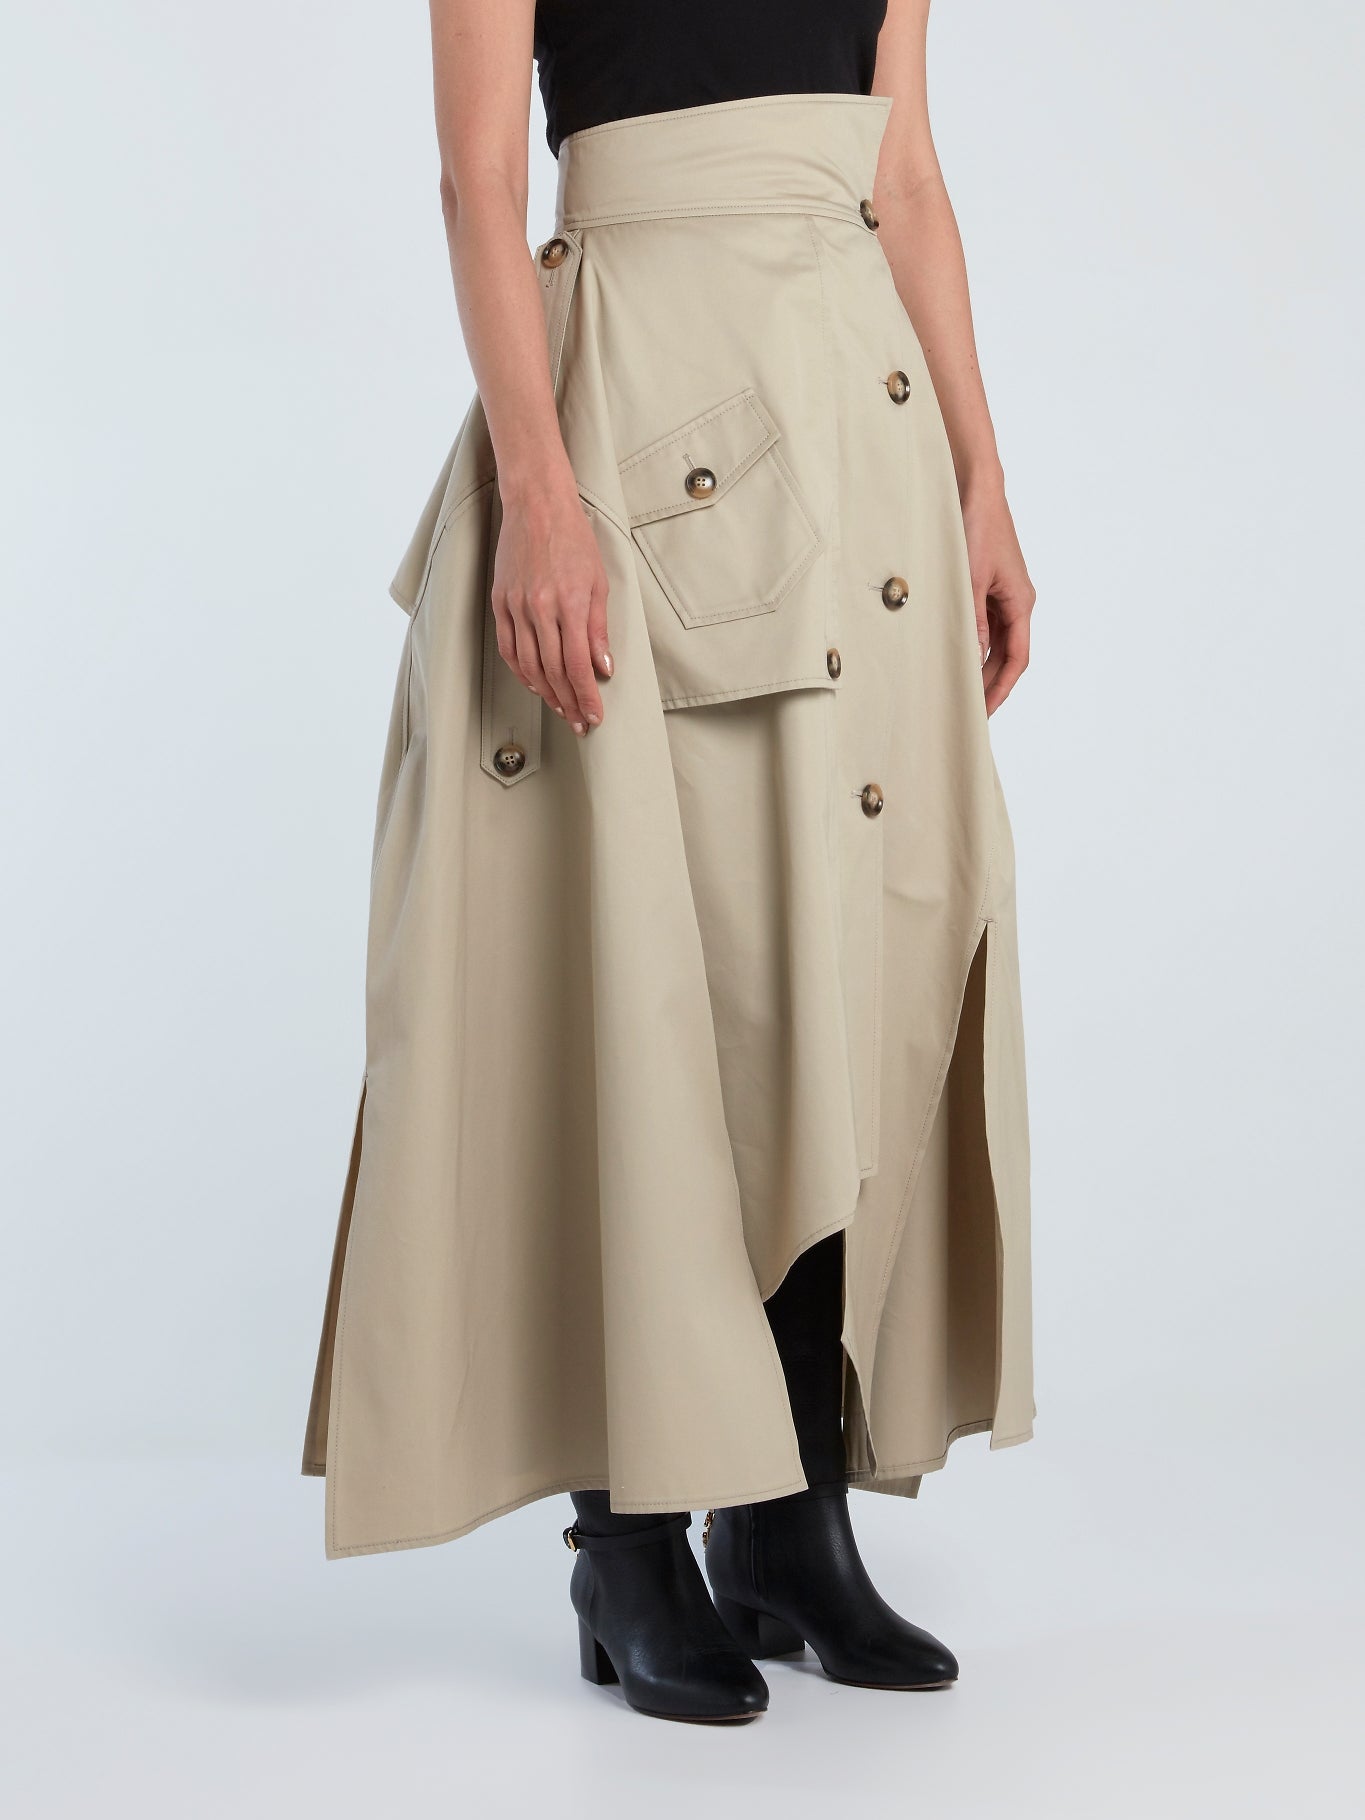 Reconstructed Trench Form – Maxi Global Skirt Store Maison-B-More